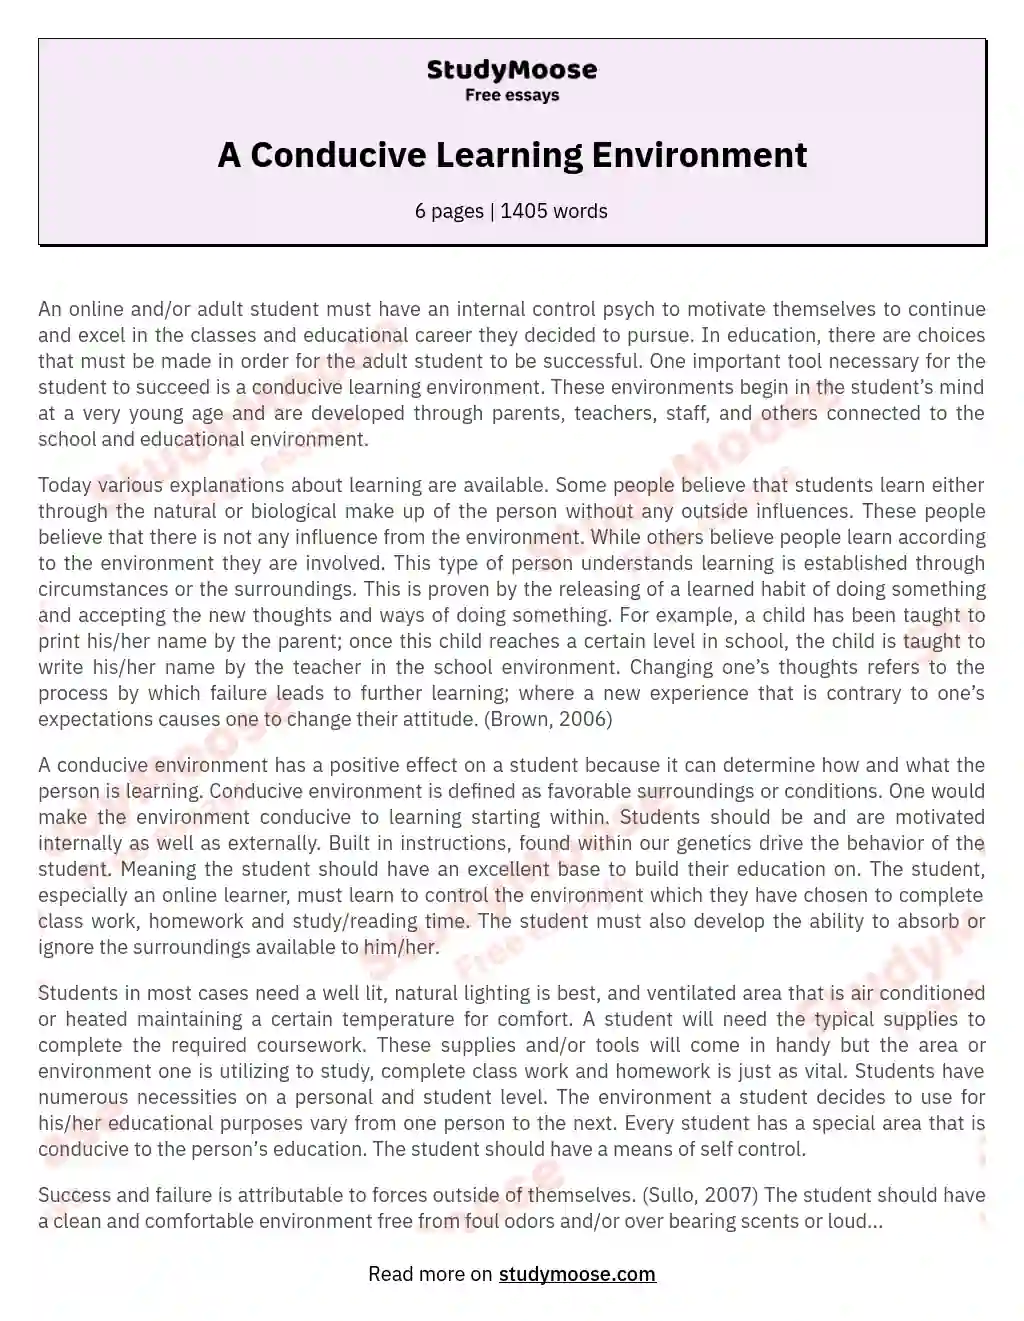 what is a conducive learning environment essay